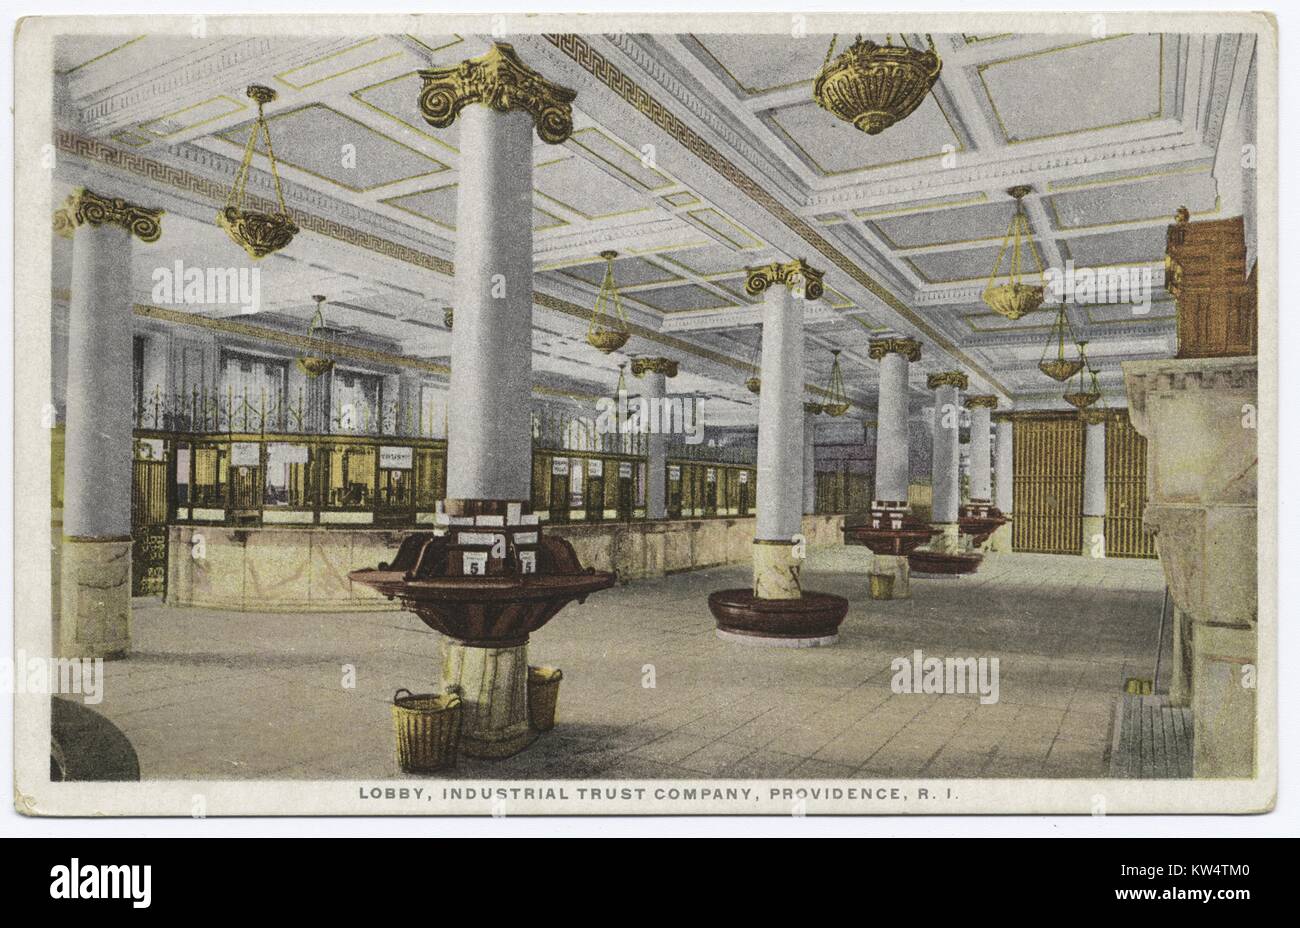 Postcard showing the lobby of the Industrial Trust Company building, Providence, Rhode Island, 1914. From the New York Public Library. Stock Photo